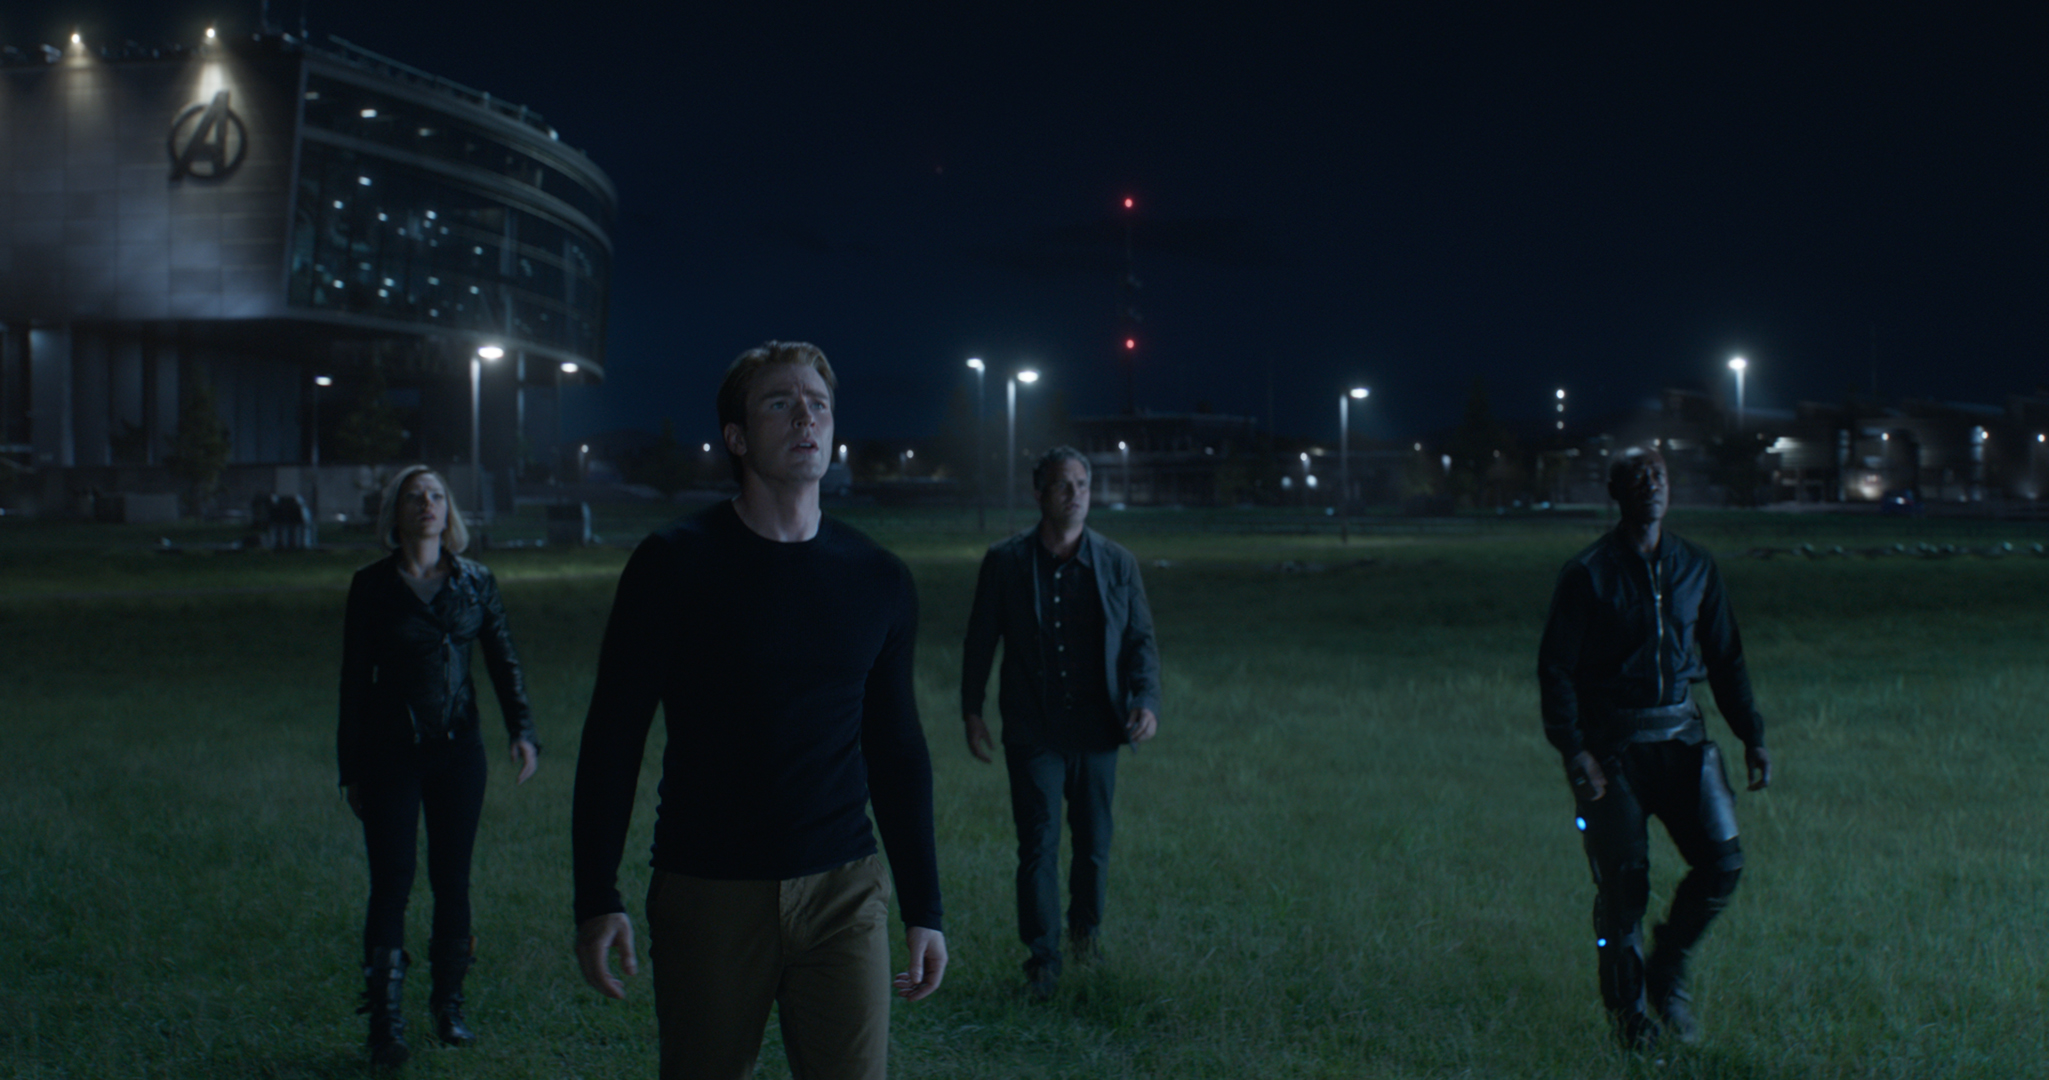 Movie Review – “AVENGERS; THE END GAME” One of the Worlds Highest